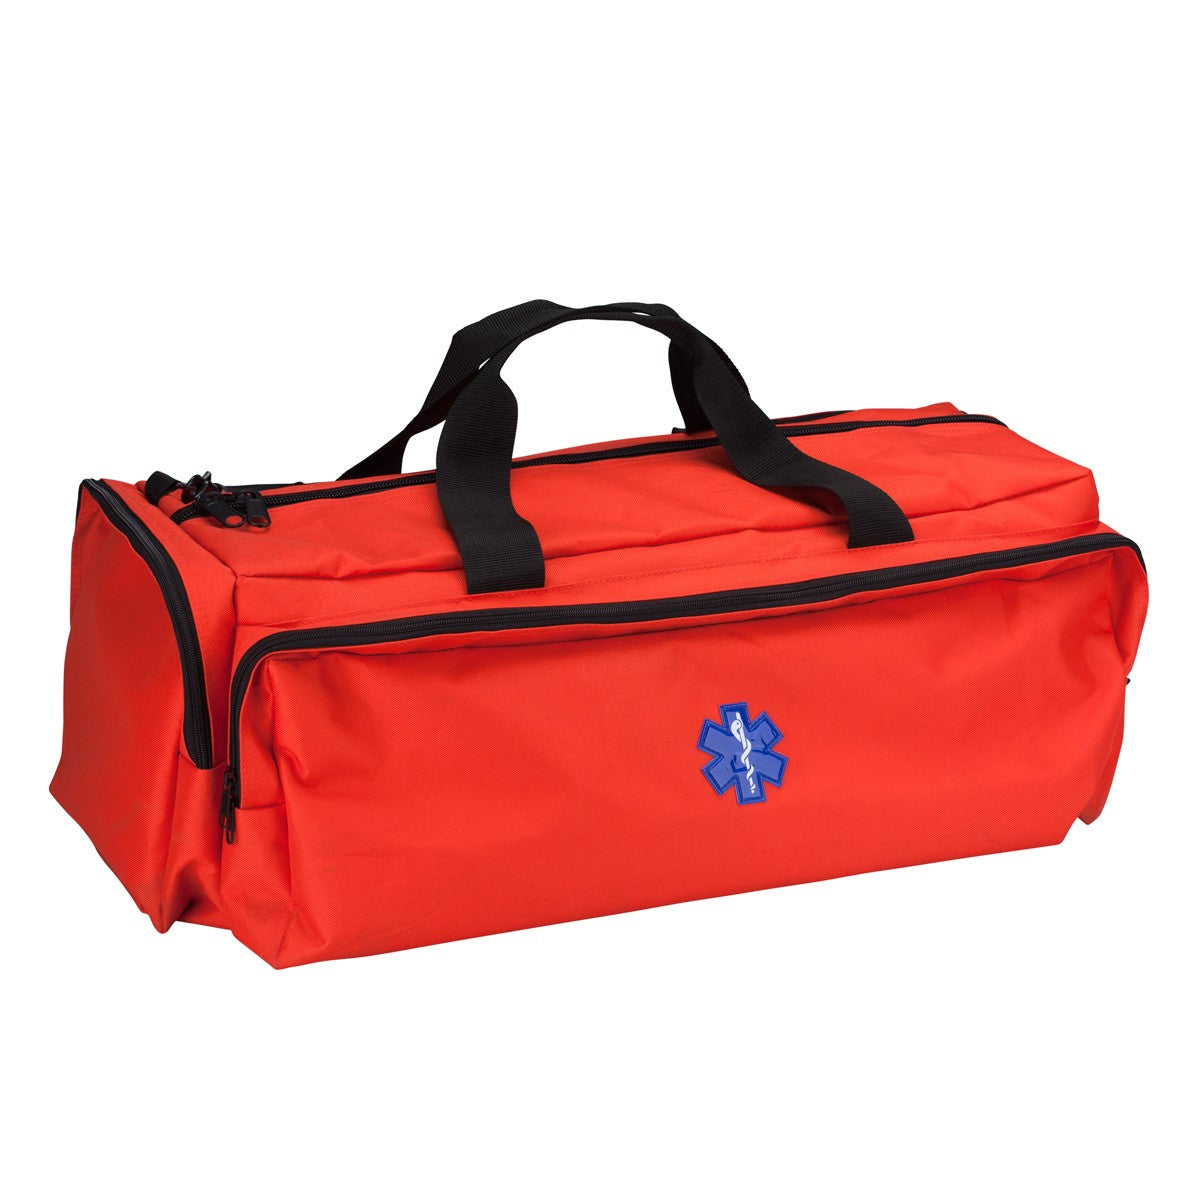 First Responder Kit, Extra Large In Duffle Bag - BS-FAK-90649-1-FM